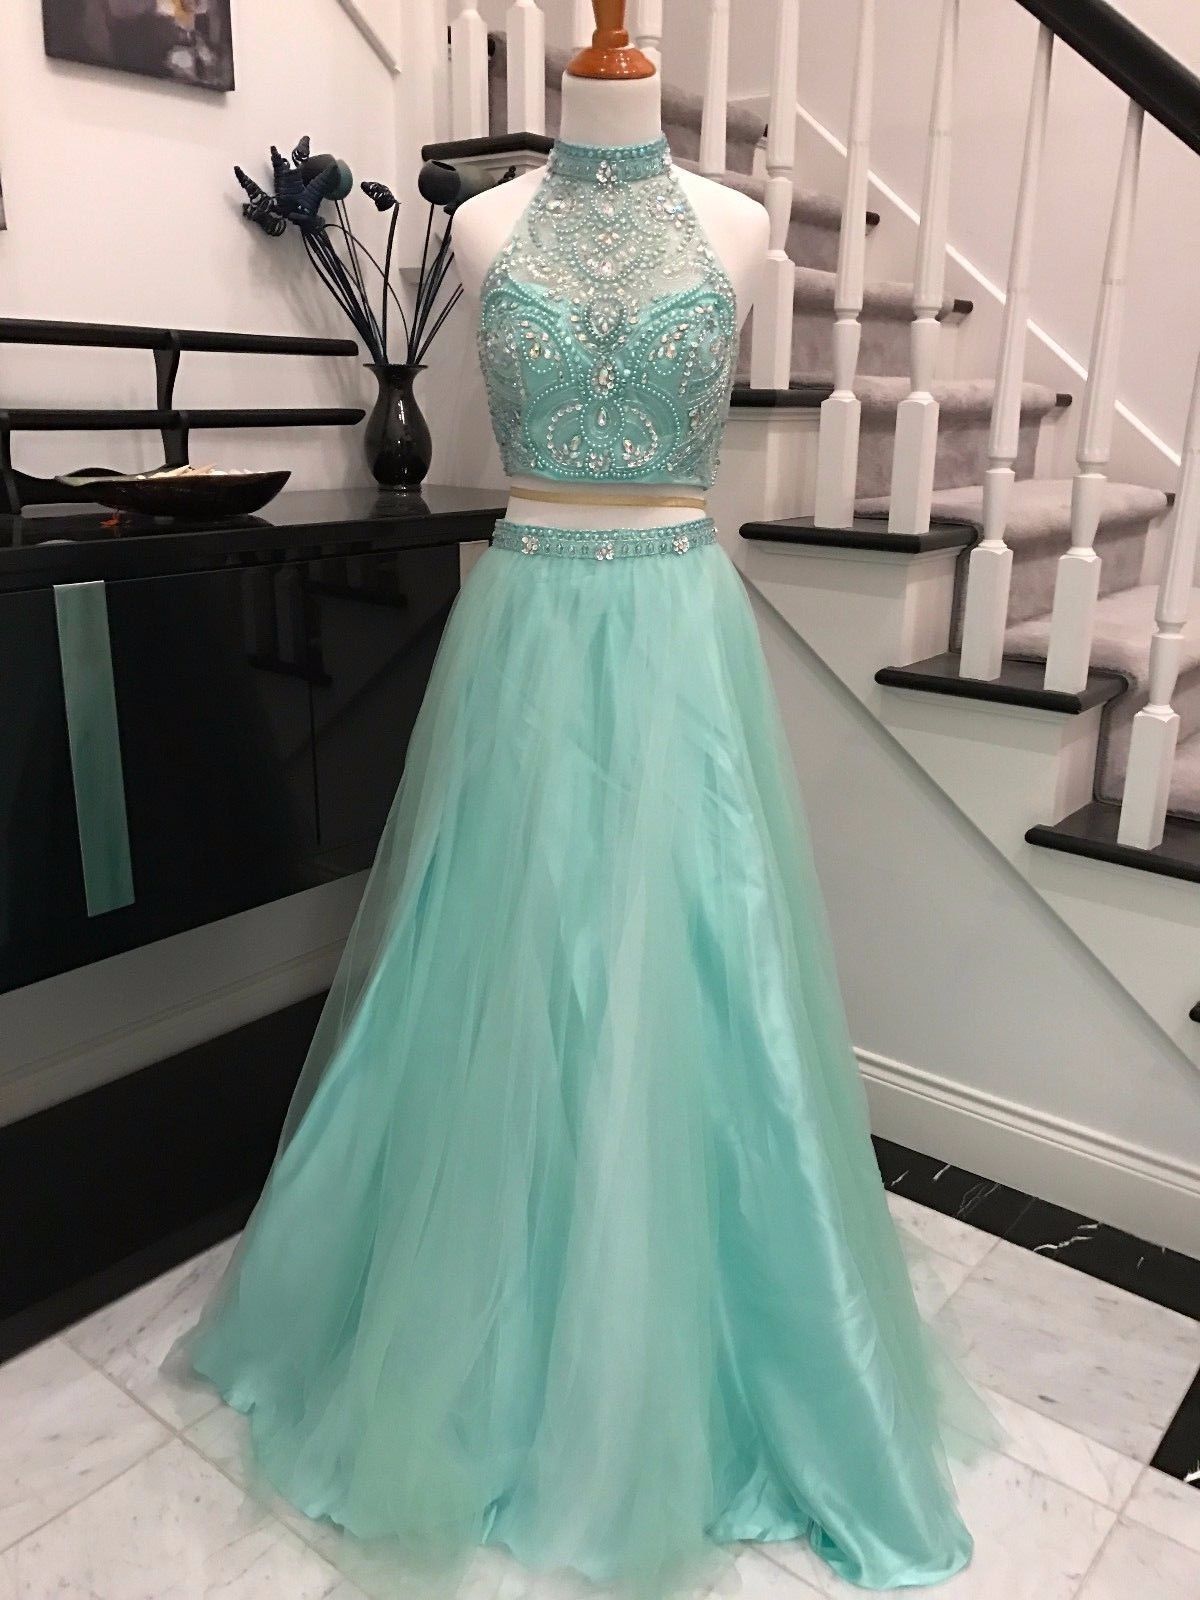 Charming Light Green 2 Piece Prom Dresses Sexy Beaded Long Halter Tulle Evening Dresses 2017 Real Photo Women Party Dresses Formal Gowns